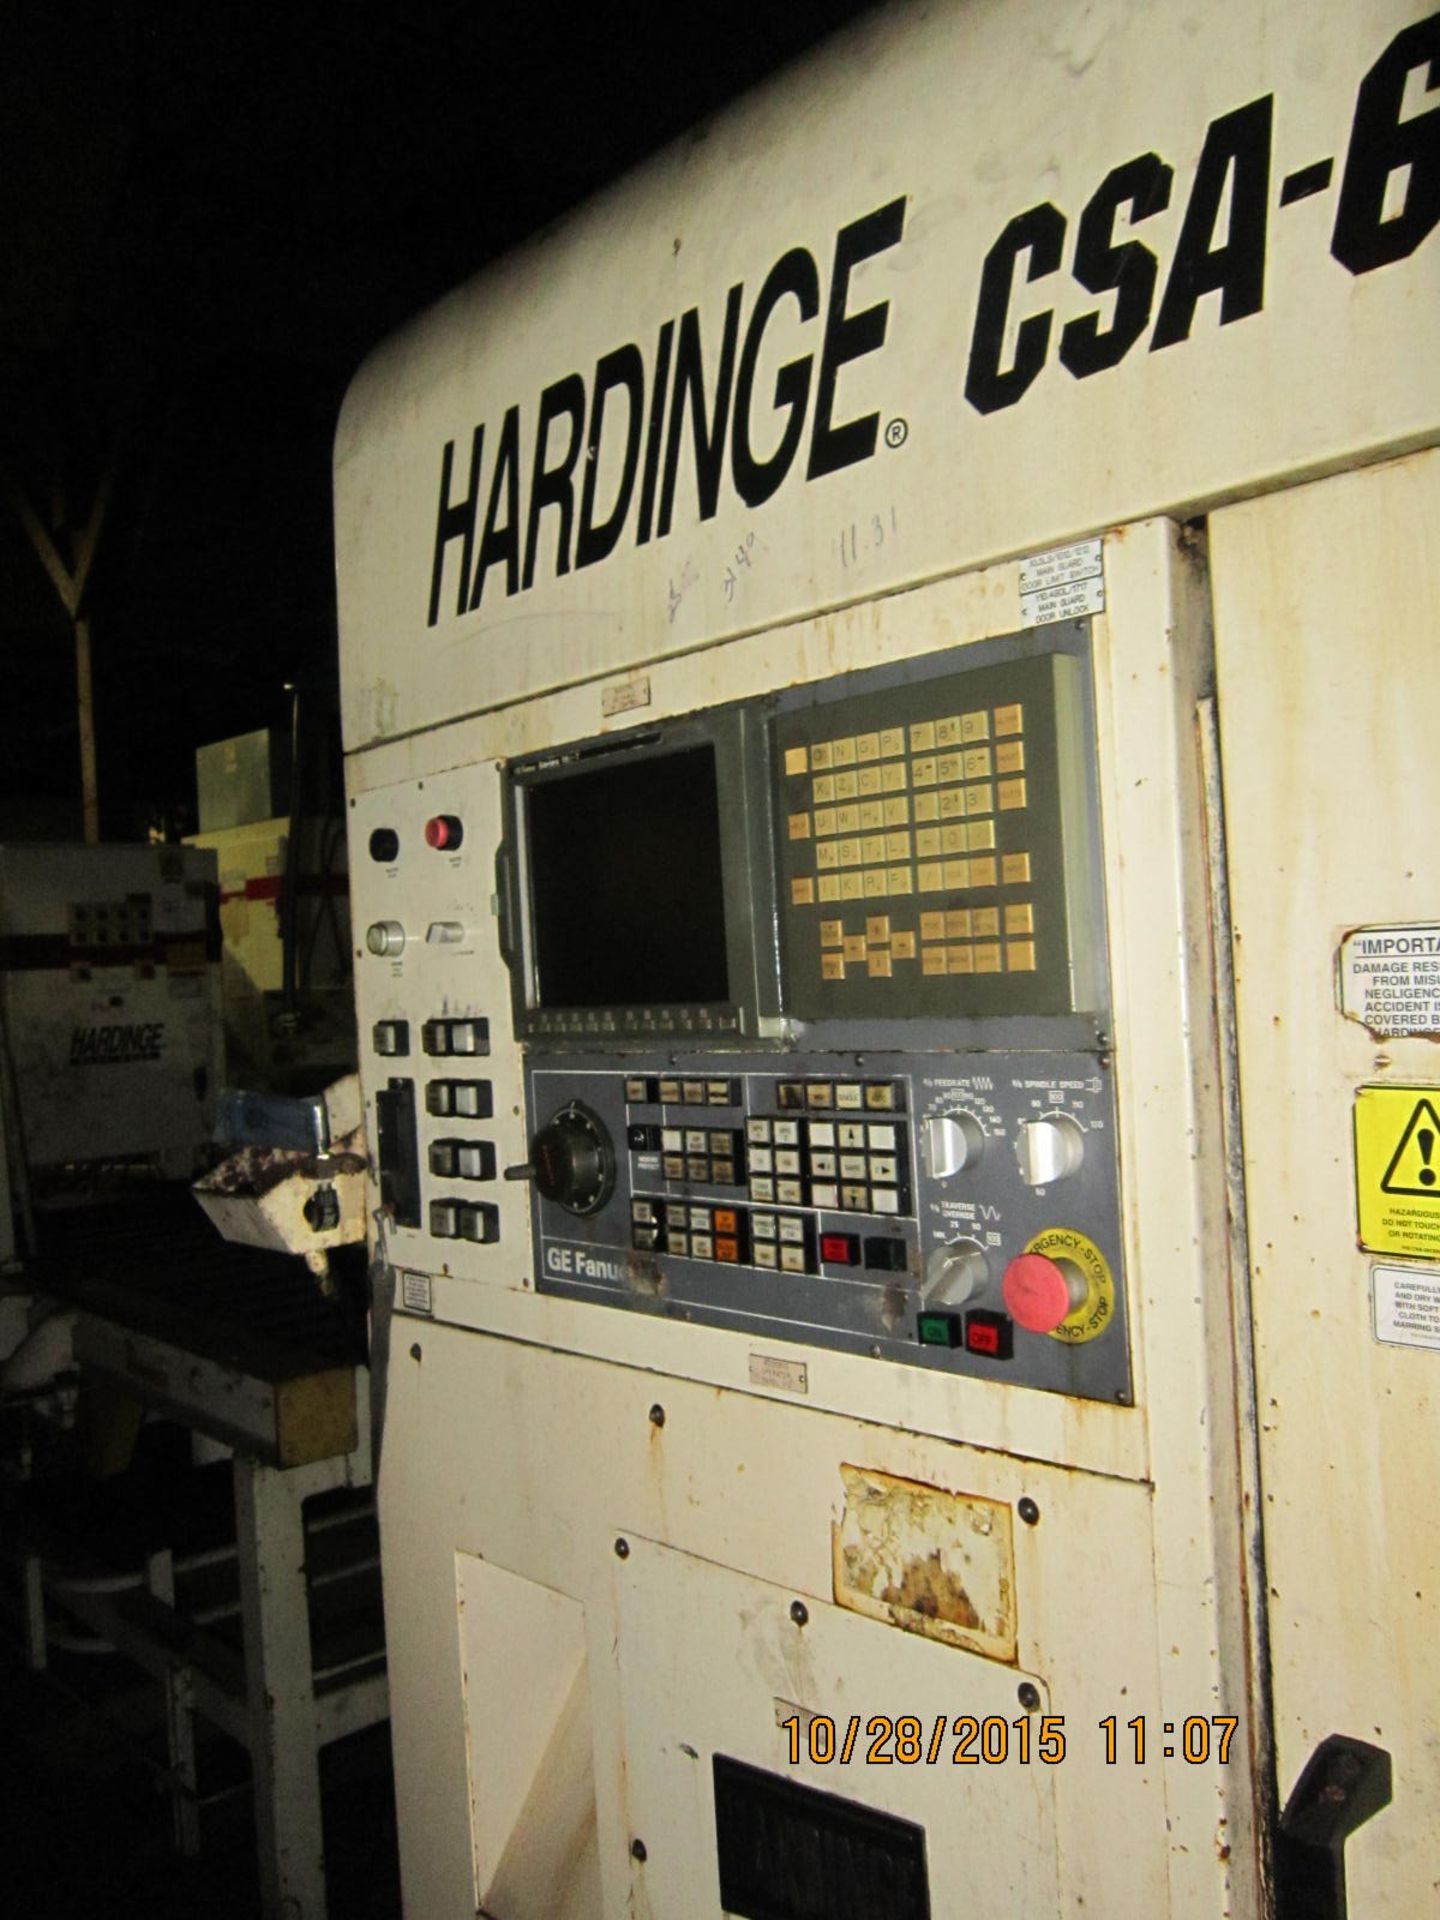 HARDINGE MODEL CSA 65 CNC LATHE WITH LOADER, 1999, LOCATION MI, BUYER TO LOAD AND SHIP - Image 2 of 4